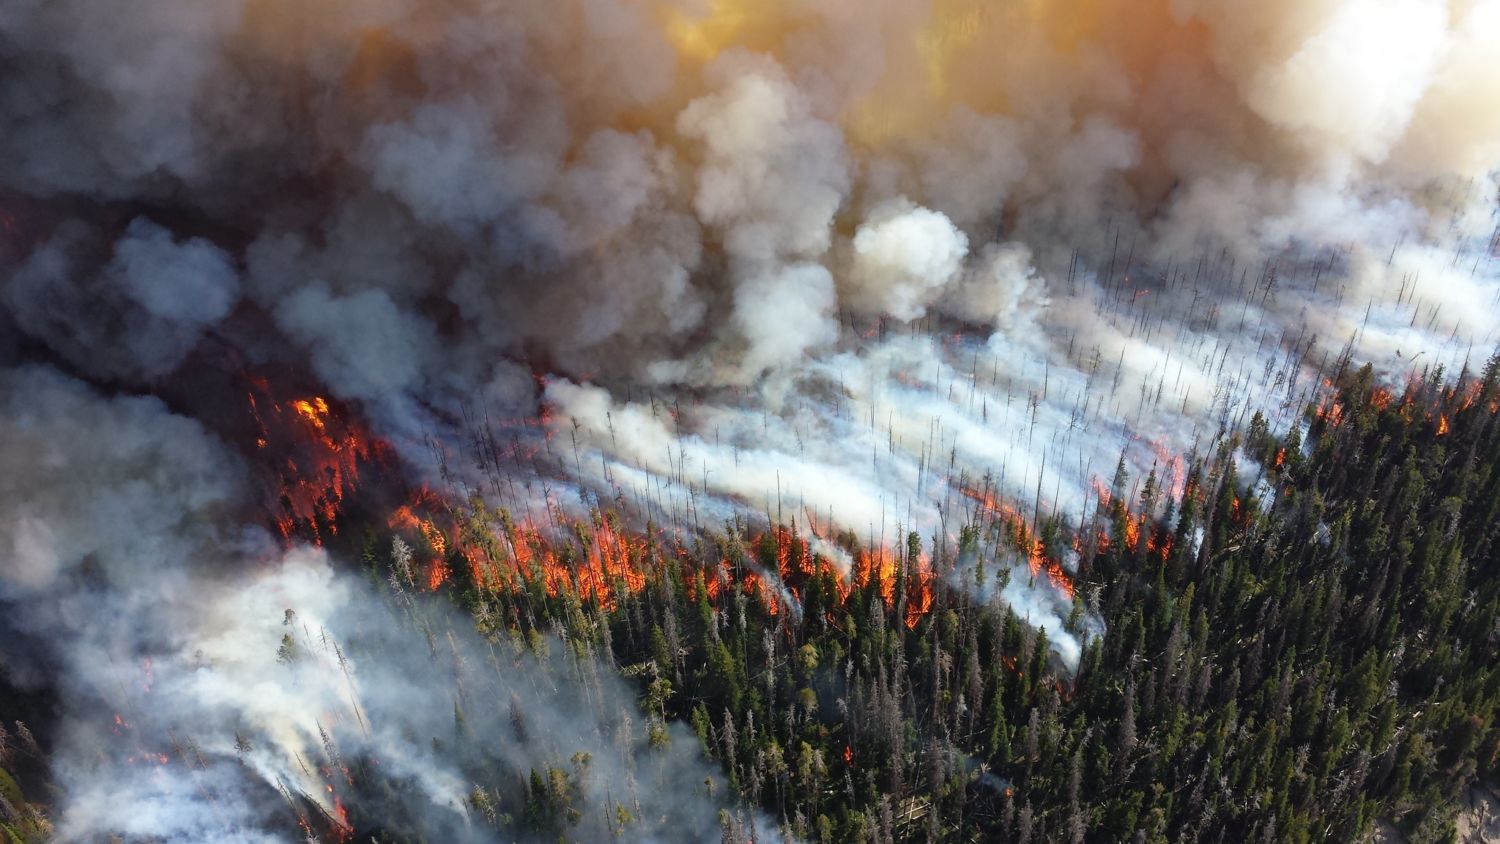 Wildfire smoke can infiltrate your home, even when windows are closed »  Yale Climate Connections